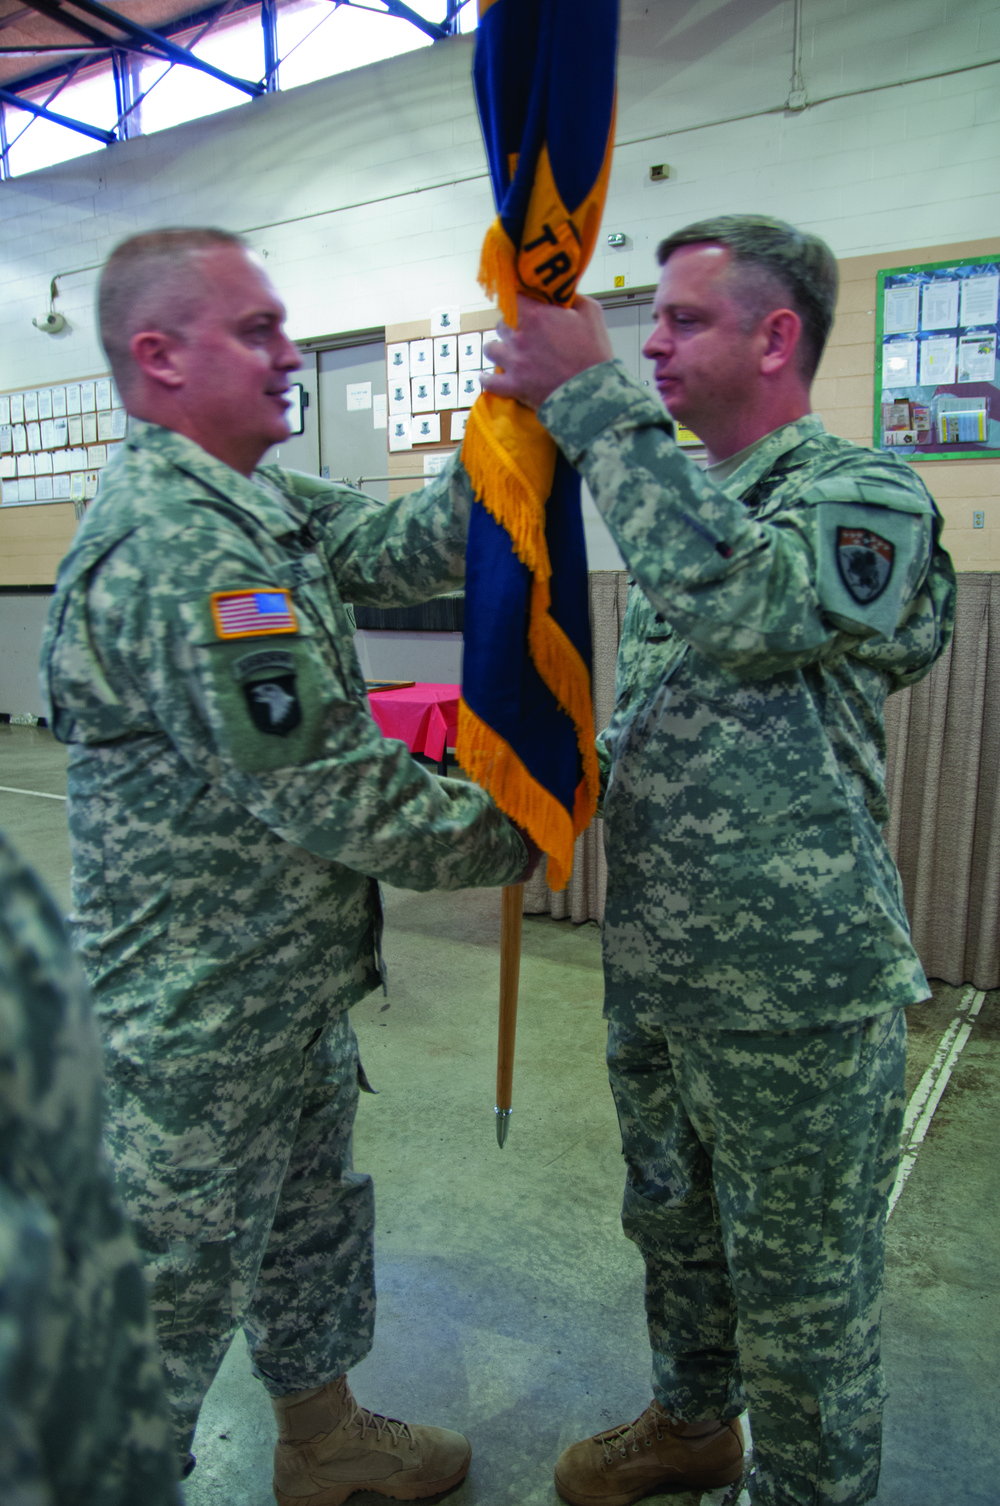 751st Troop Command Change of Command